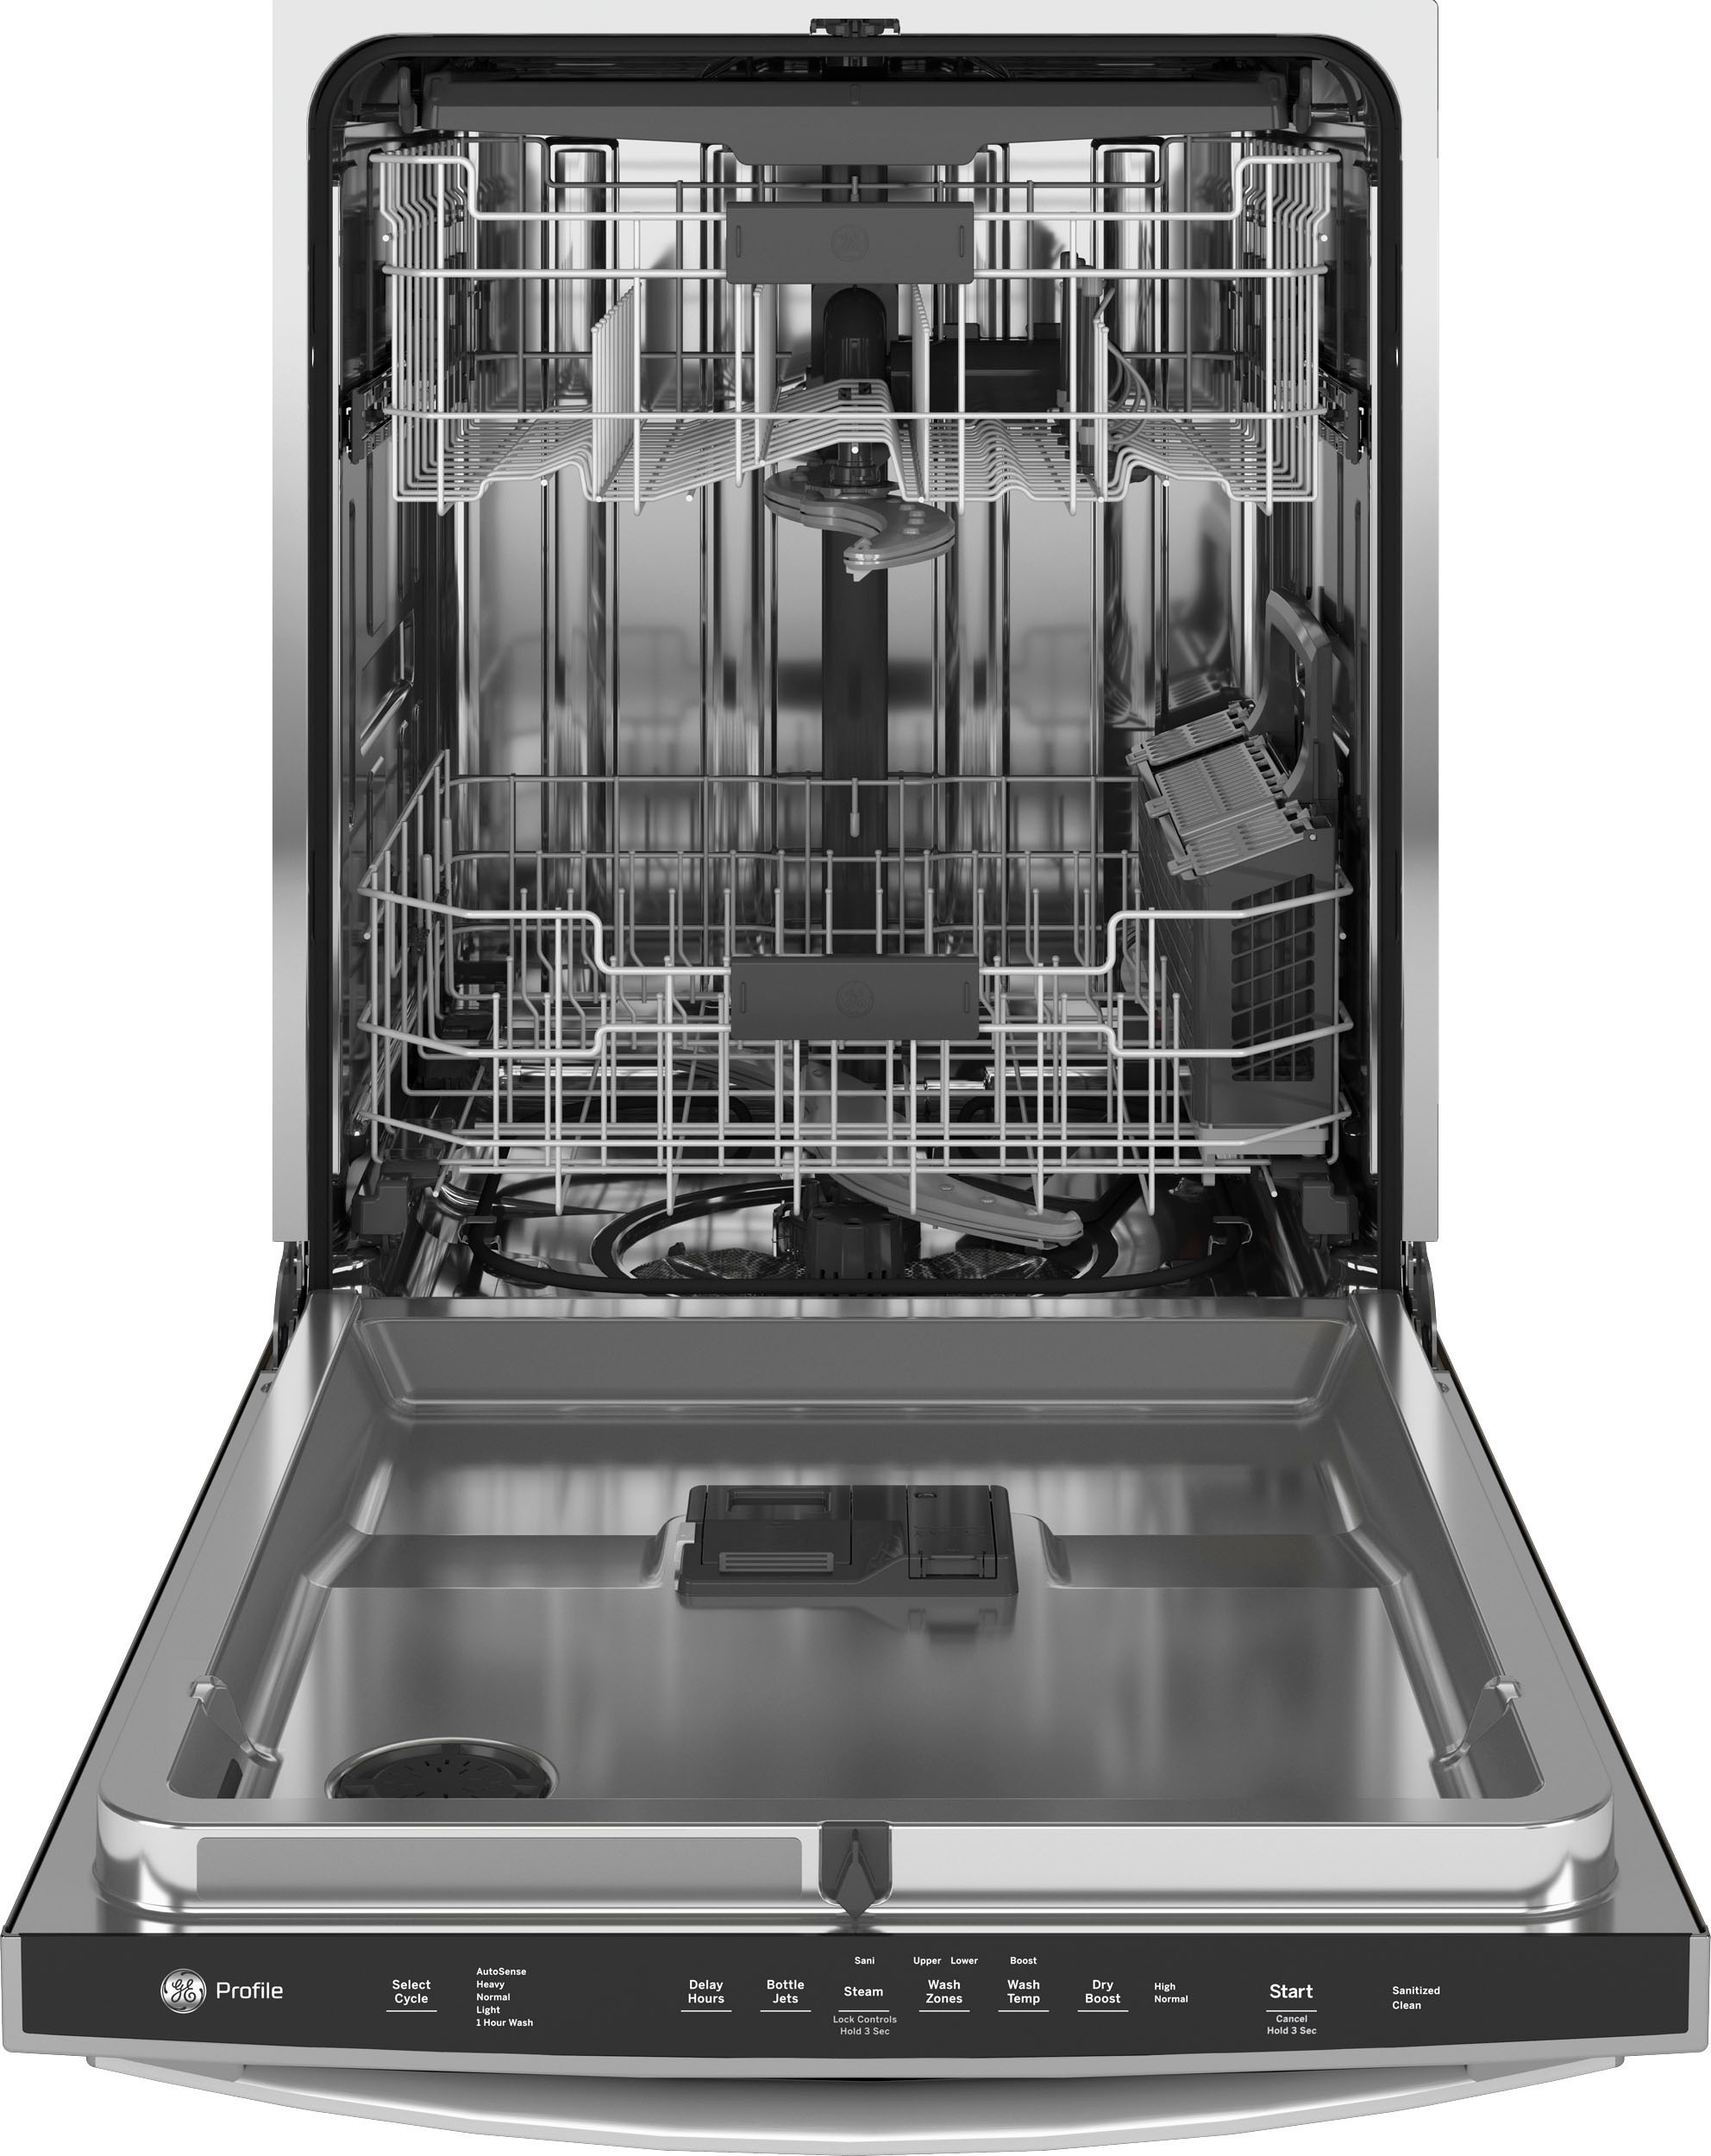 GE Profile Hidden Control Built-In Dishwasher with Stainless Steel 